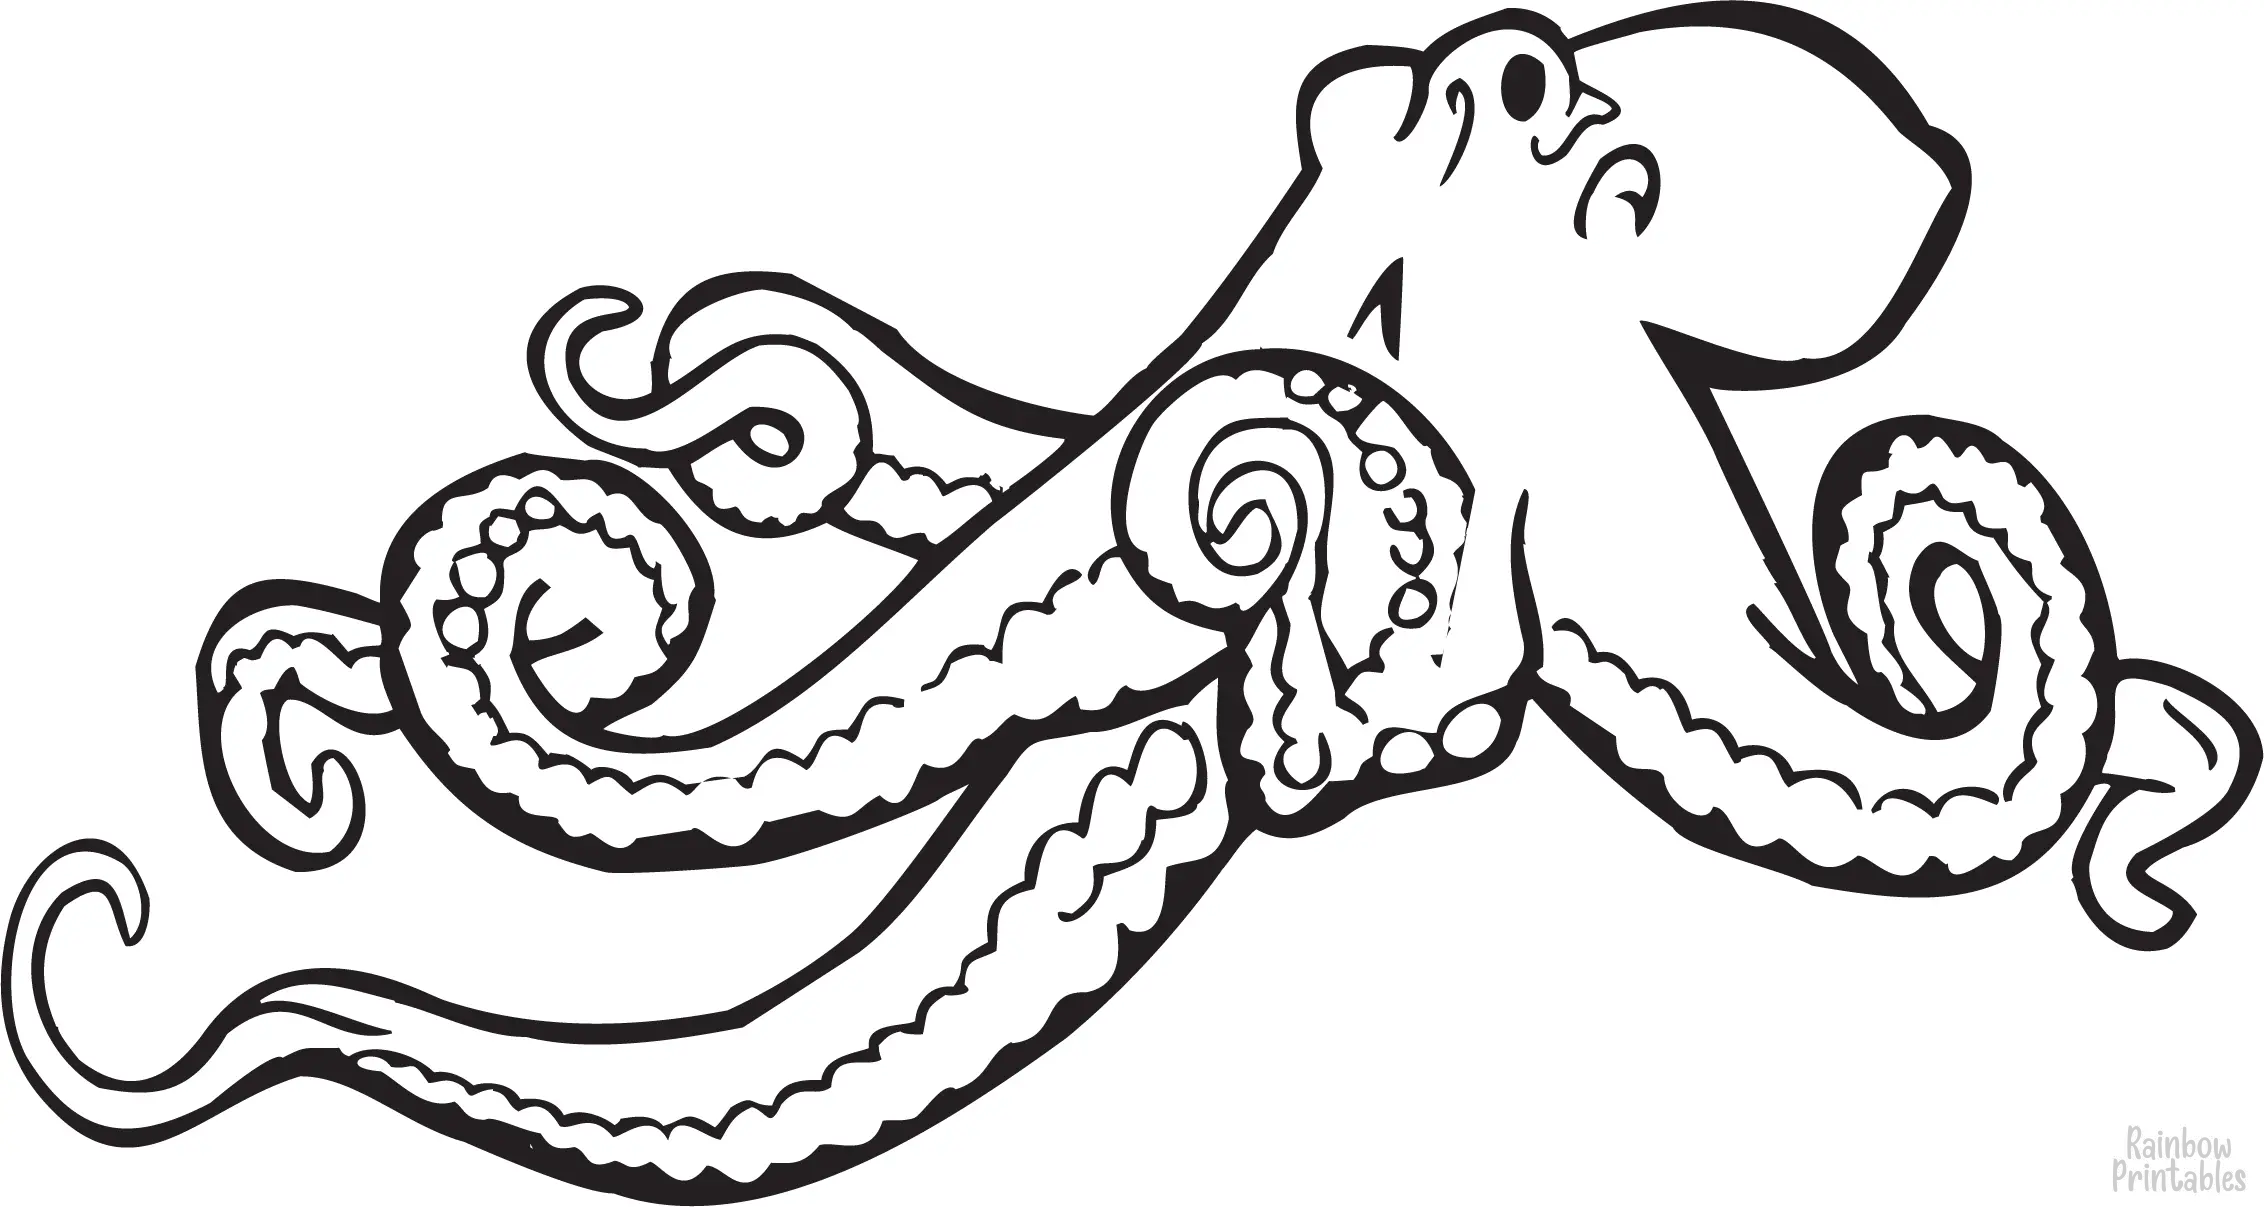 SIMPLE-EASY-line-drawings-OCTOPUS-coloring-page-for-kids